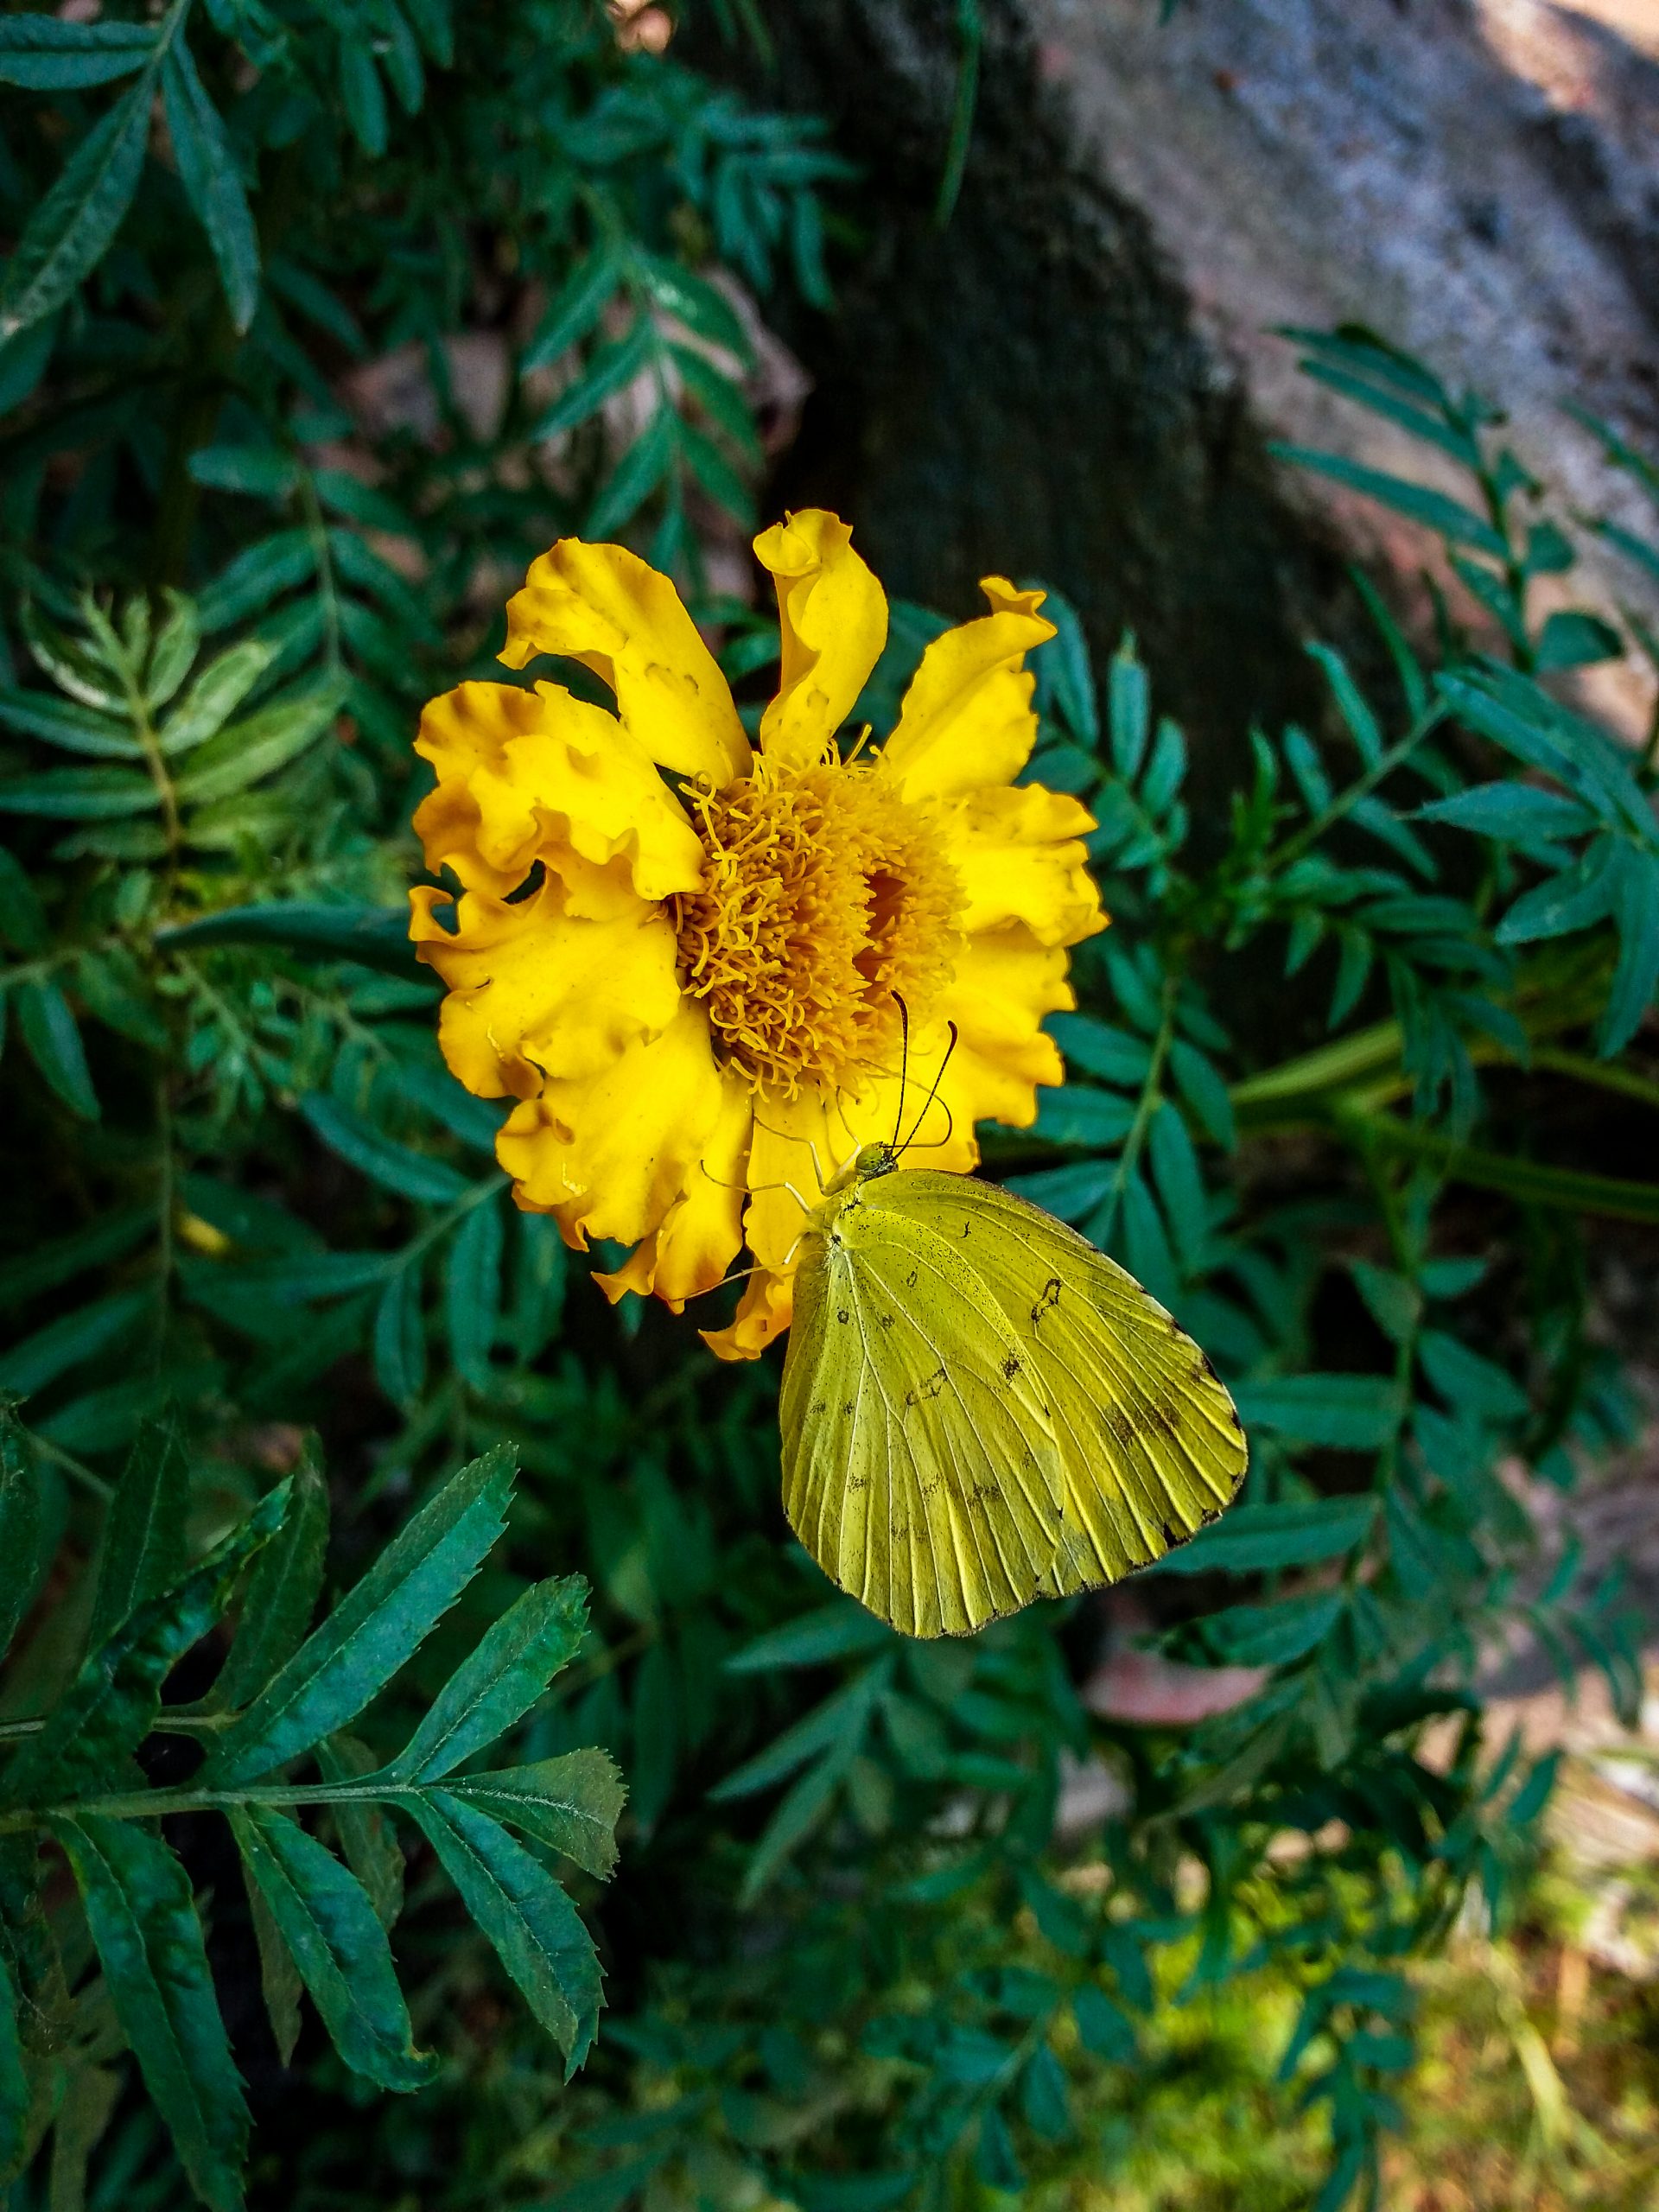 Butterfly on a marigold flower